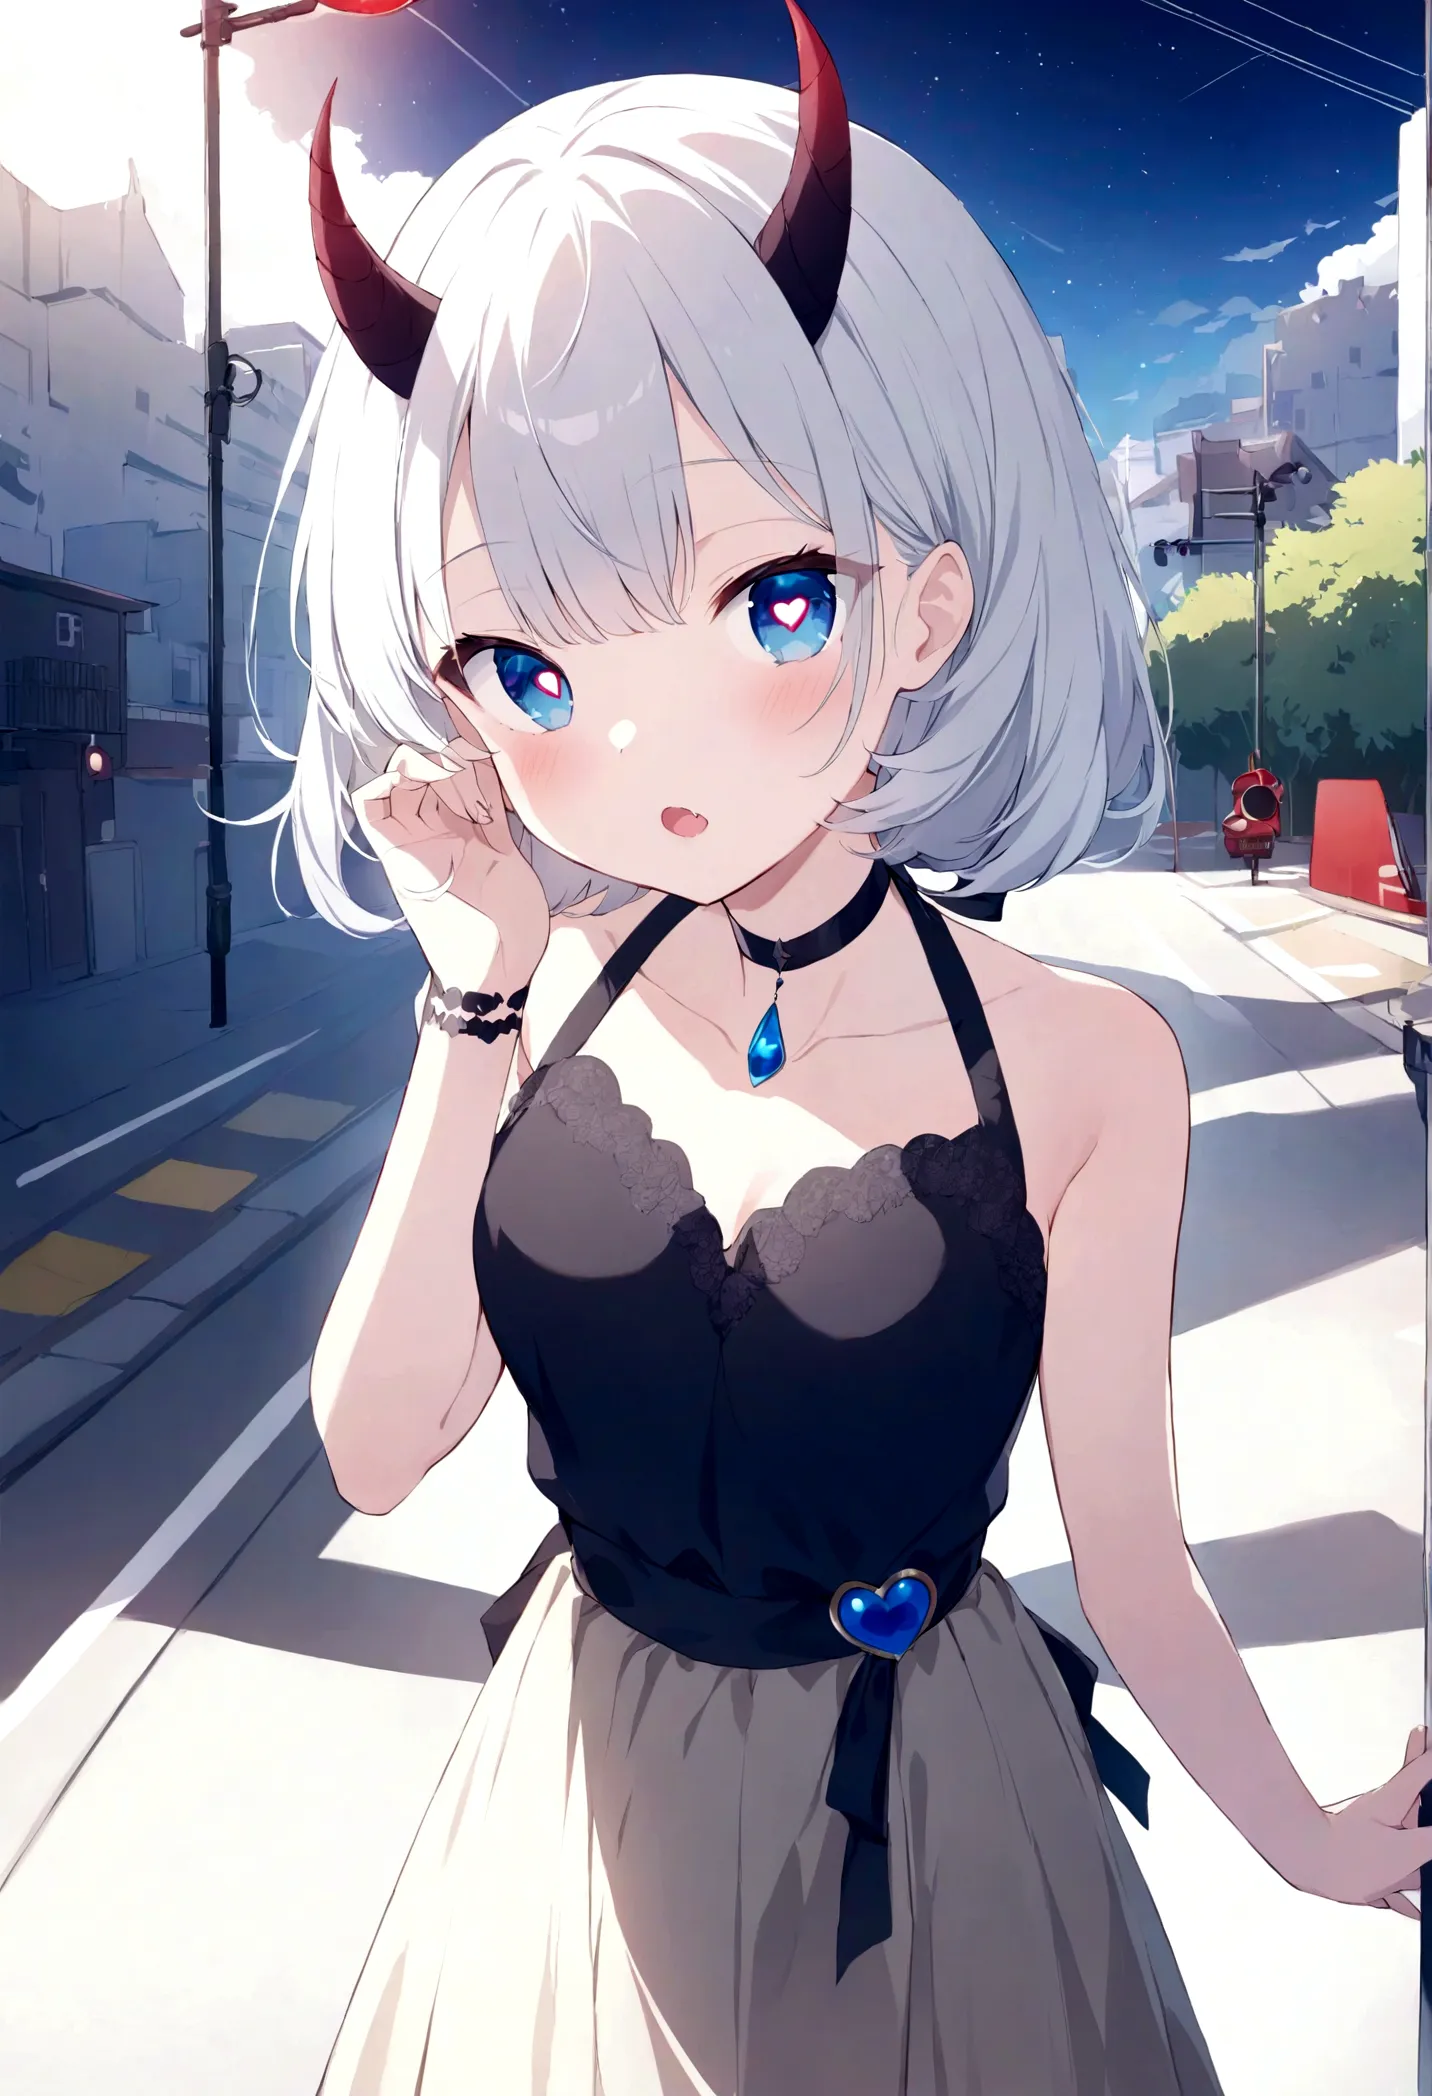 Wearing a choker、Her short white hair hangs down her back.、A seductive lonely girl showing sharp teeth reminiscent of fangs。Stri...